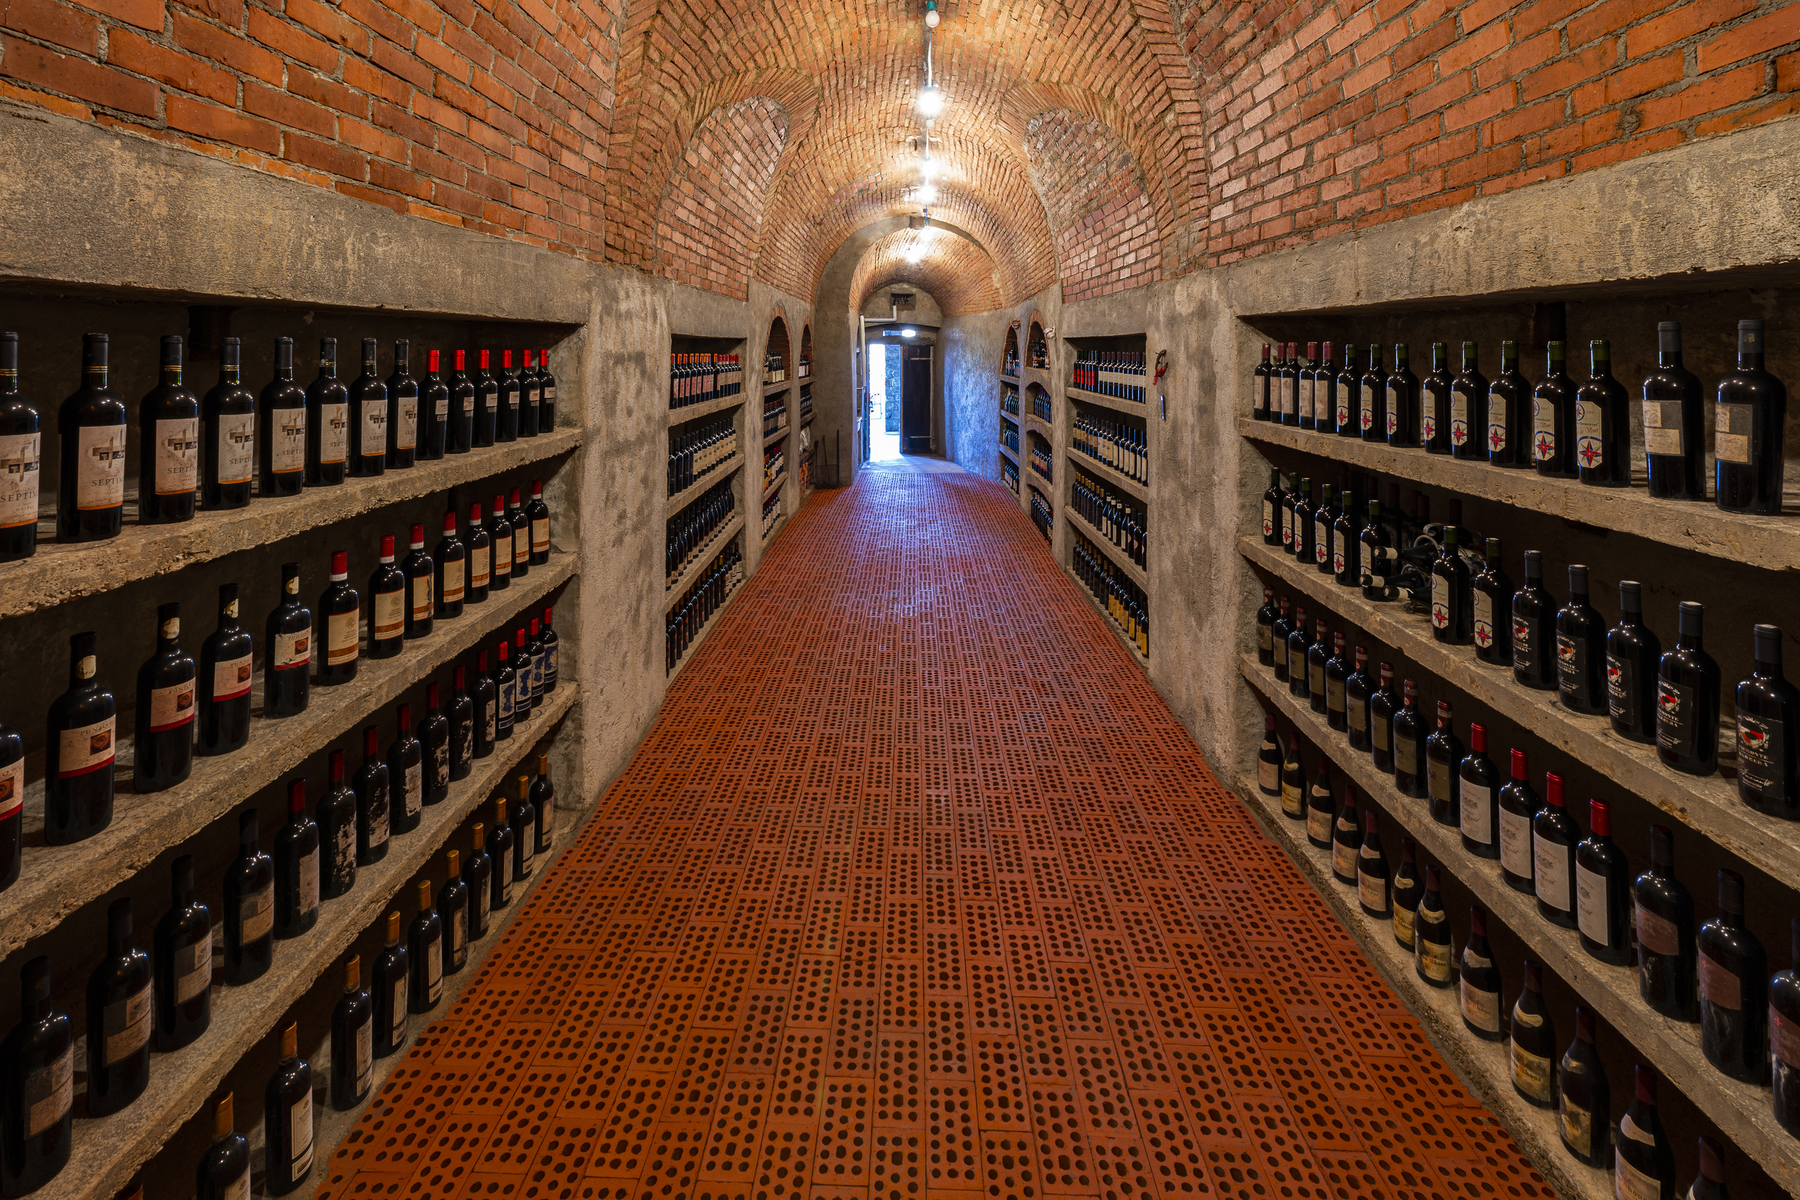 Rustico with two spectacular wine cellars